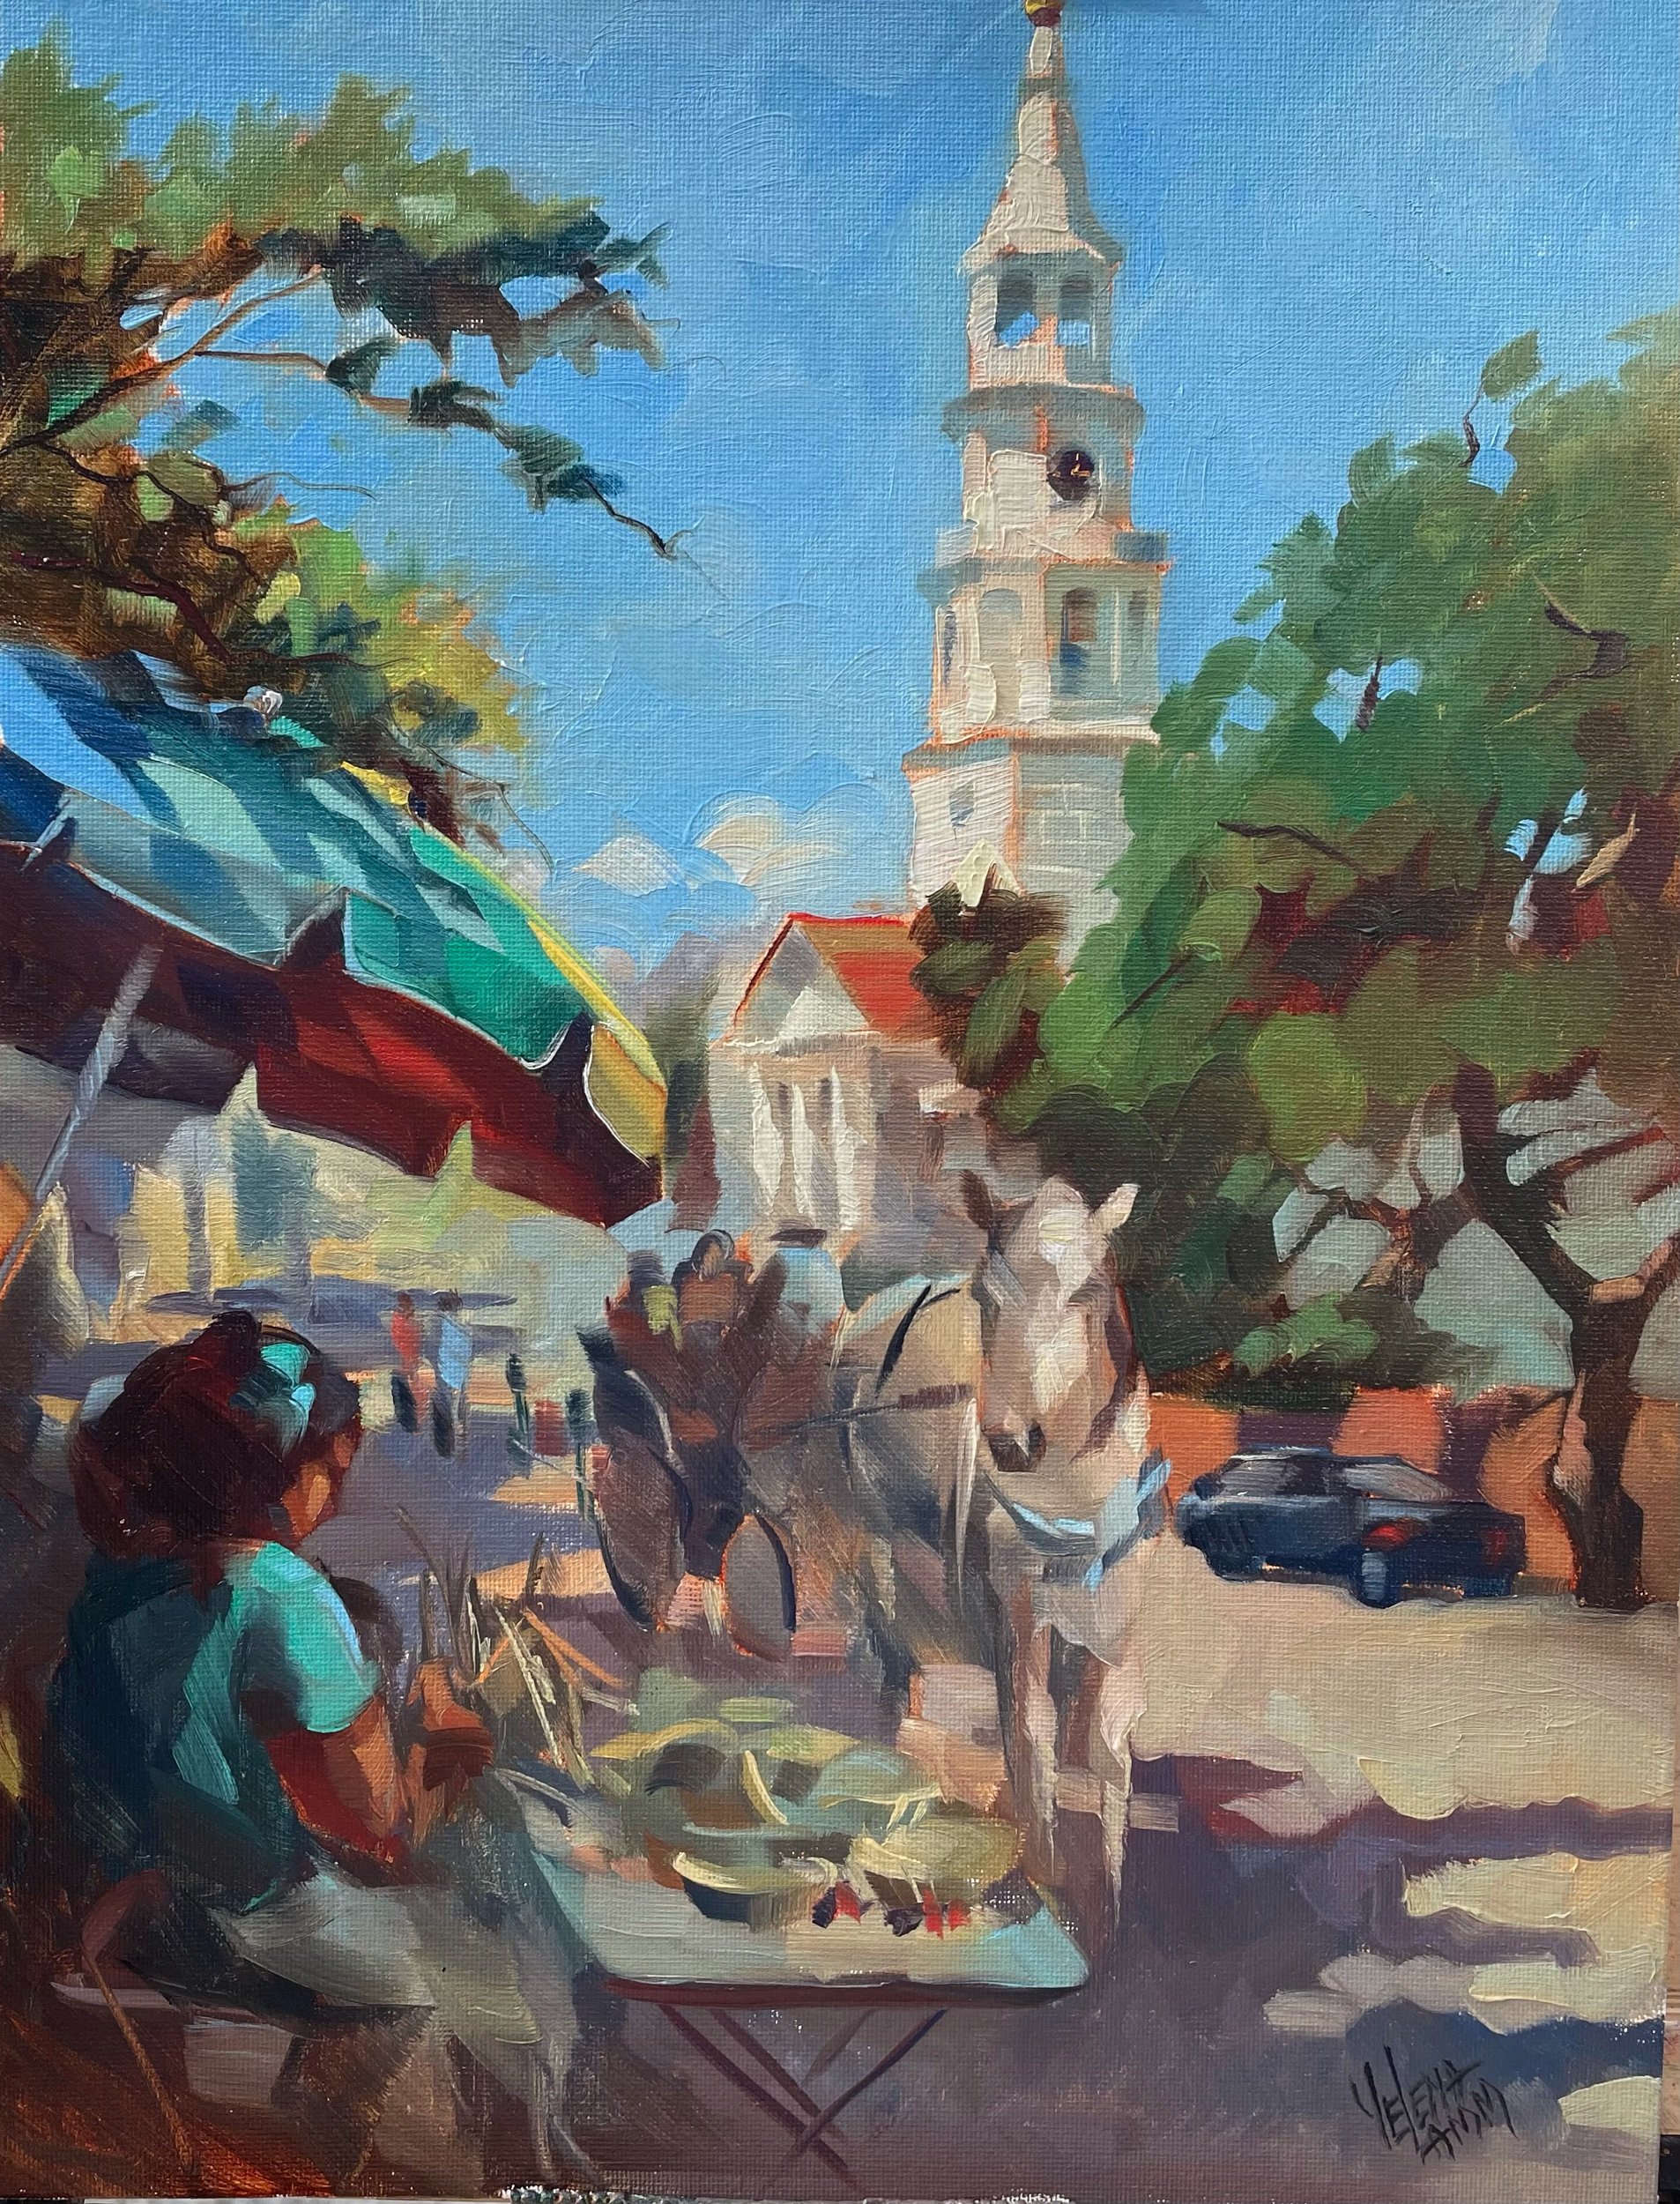   Meeting Street, Charleston SC  🔴 SOLD 20” x 10” oil  Second Place, NOAPS 2021  Small Works Wet Paint Competition      